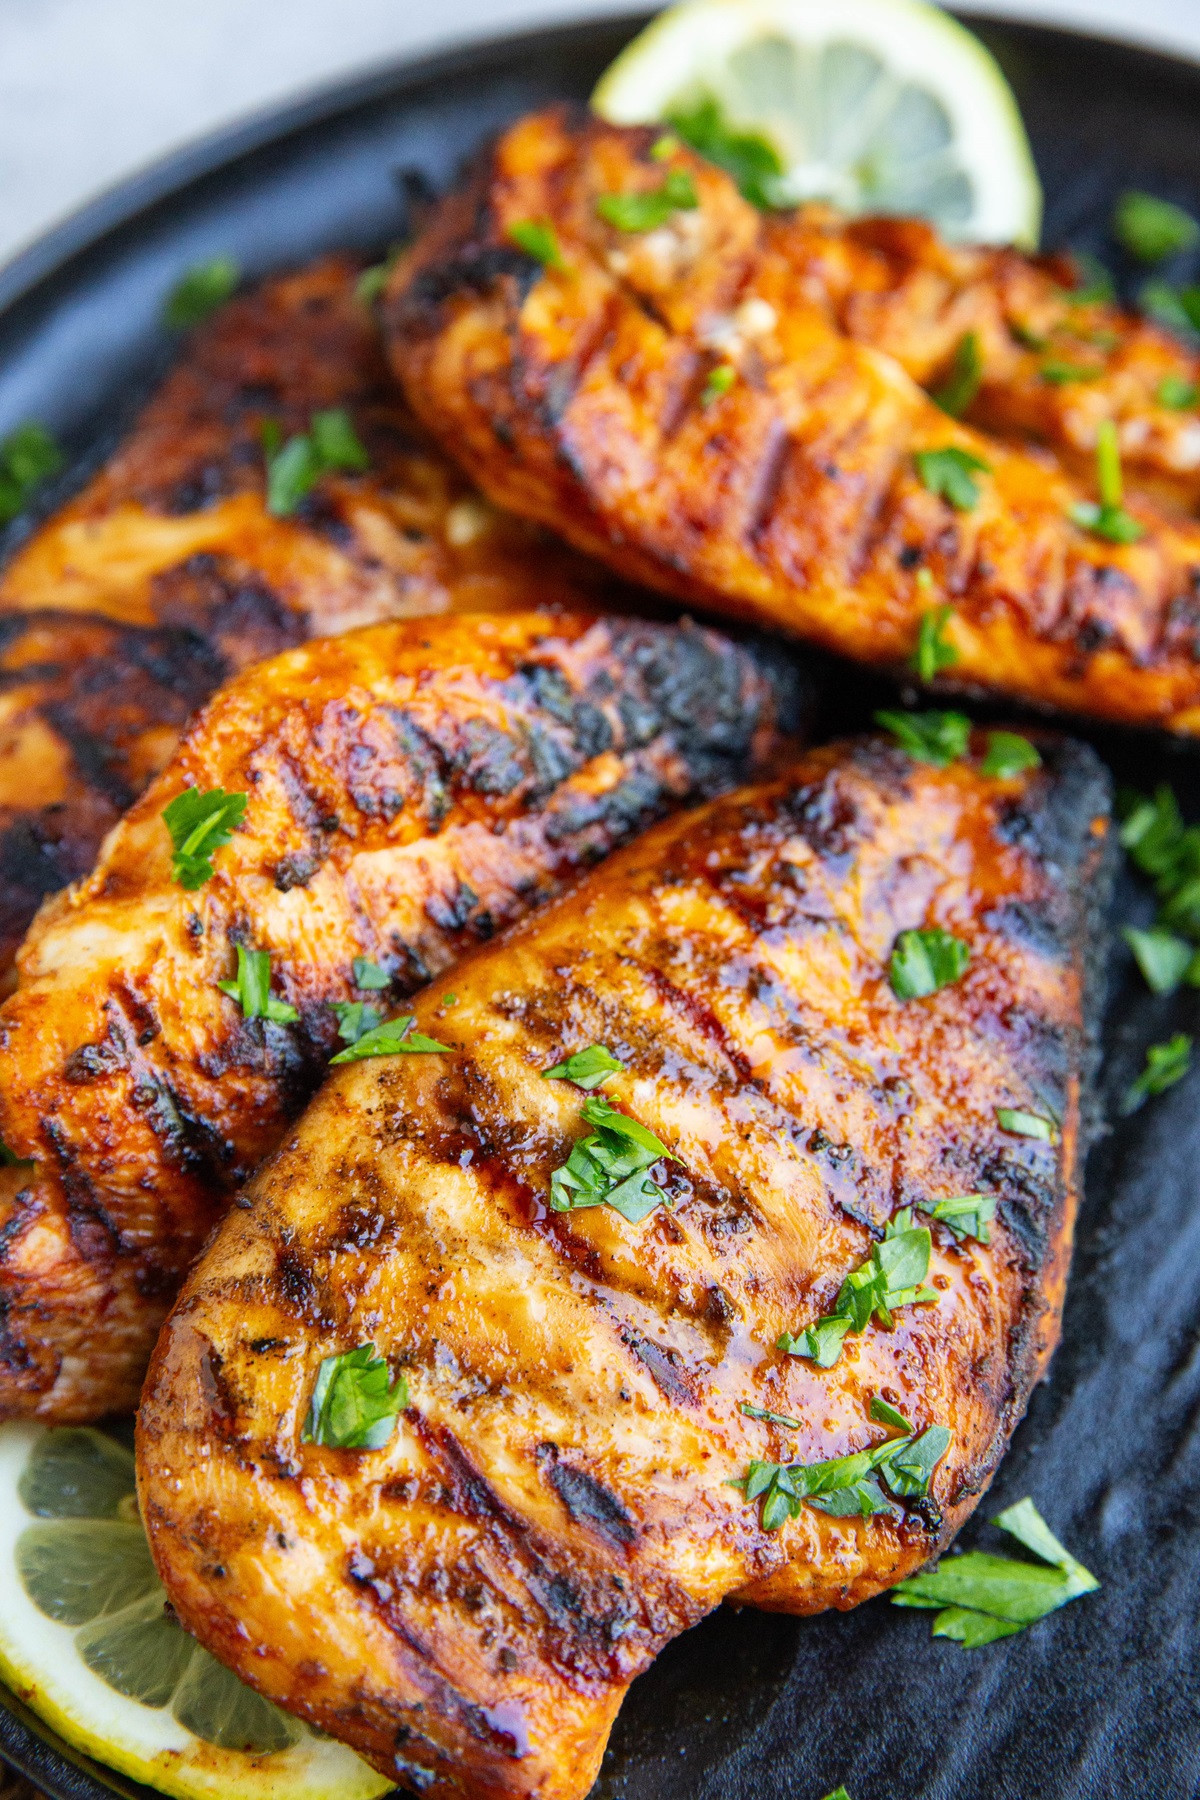 Four grilled chicken breasts on a black plate, sprinkled with fresh parsley and sliced lemons to the side.